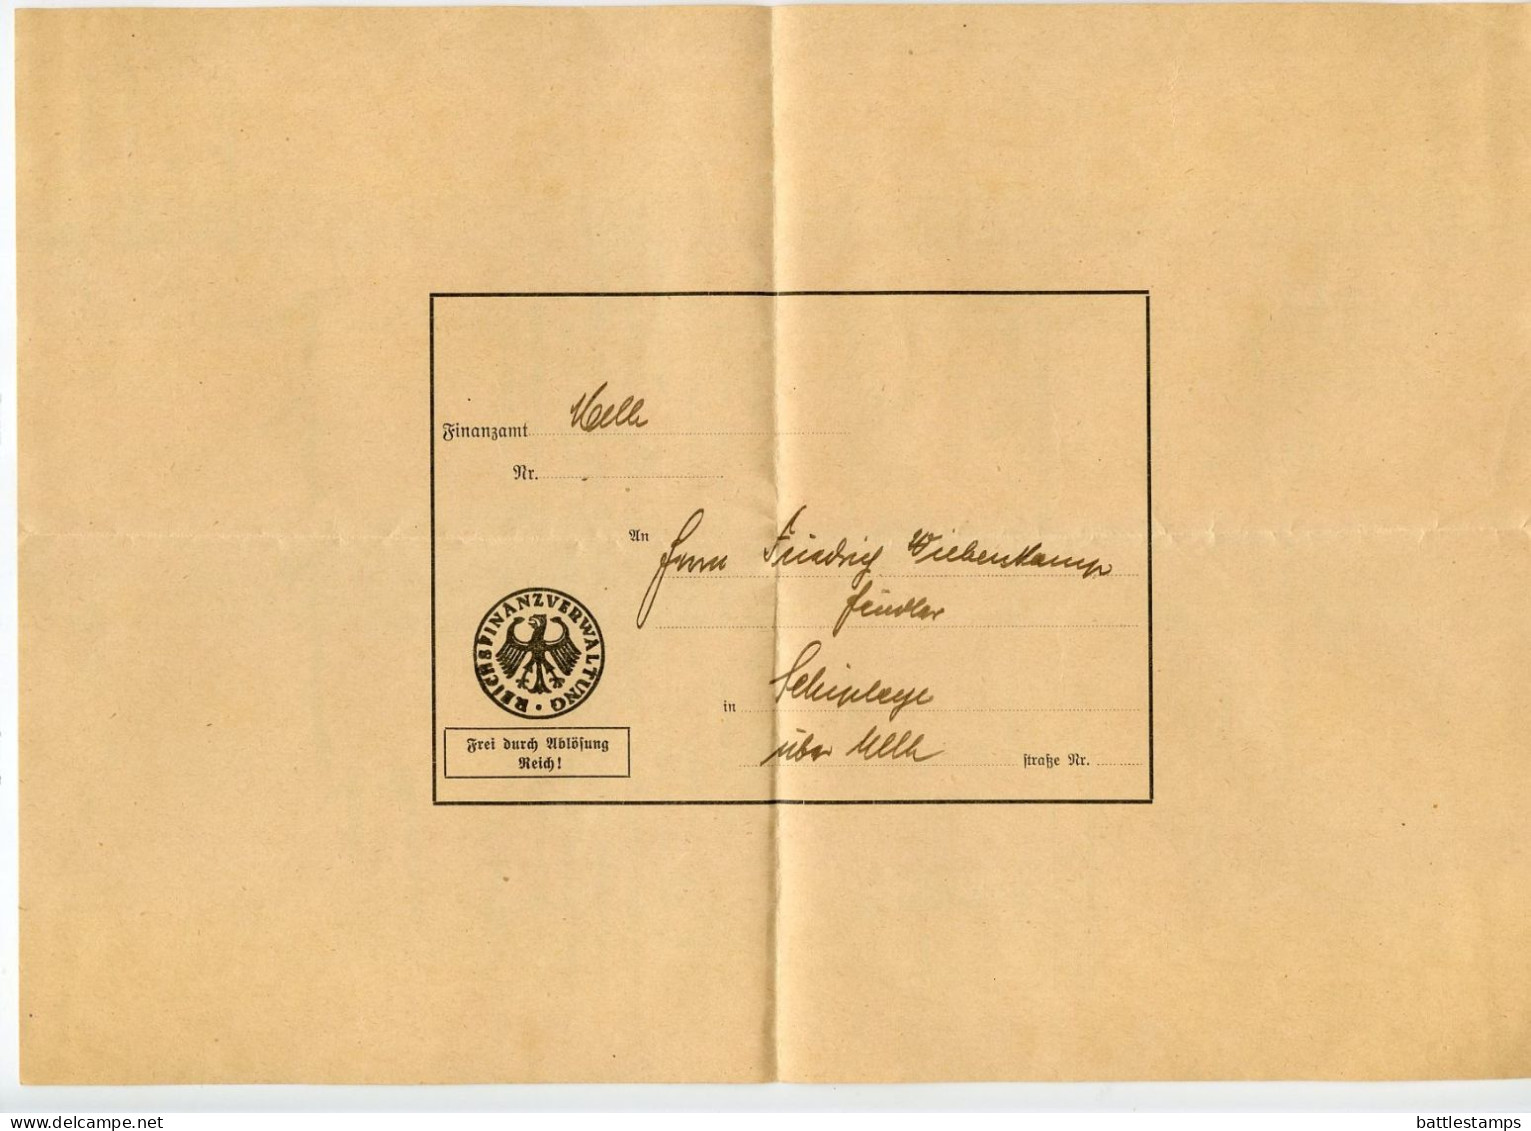 Germany 1935 Official Cover, Document & Steuerzahlkarte (Tax Payment Card); Melle - Finanzamt (Tax Office) to Schiplage